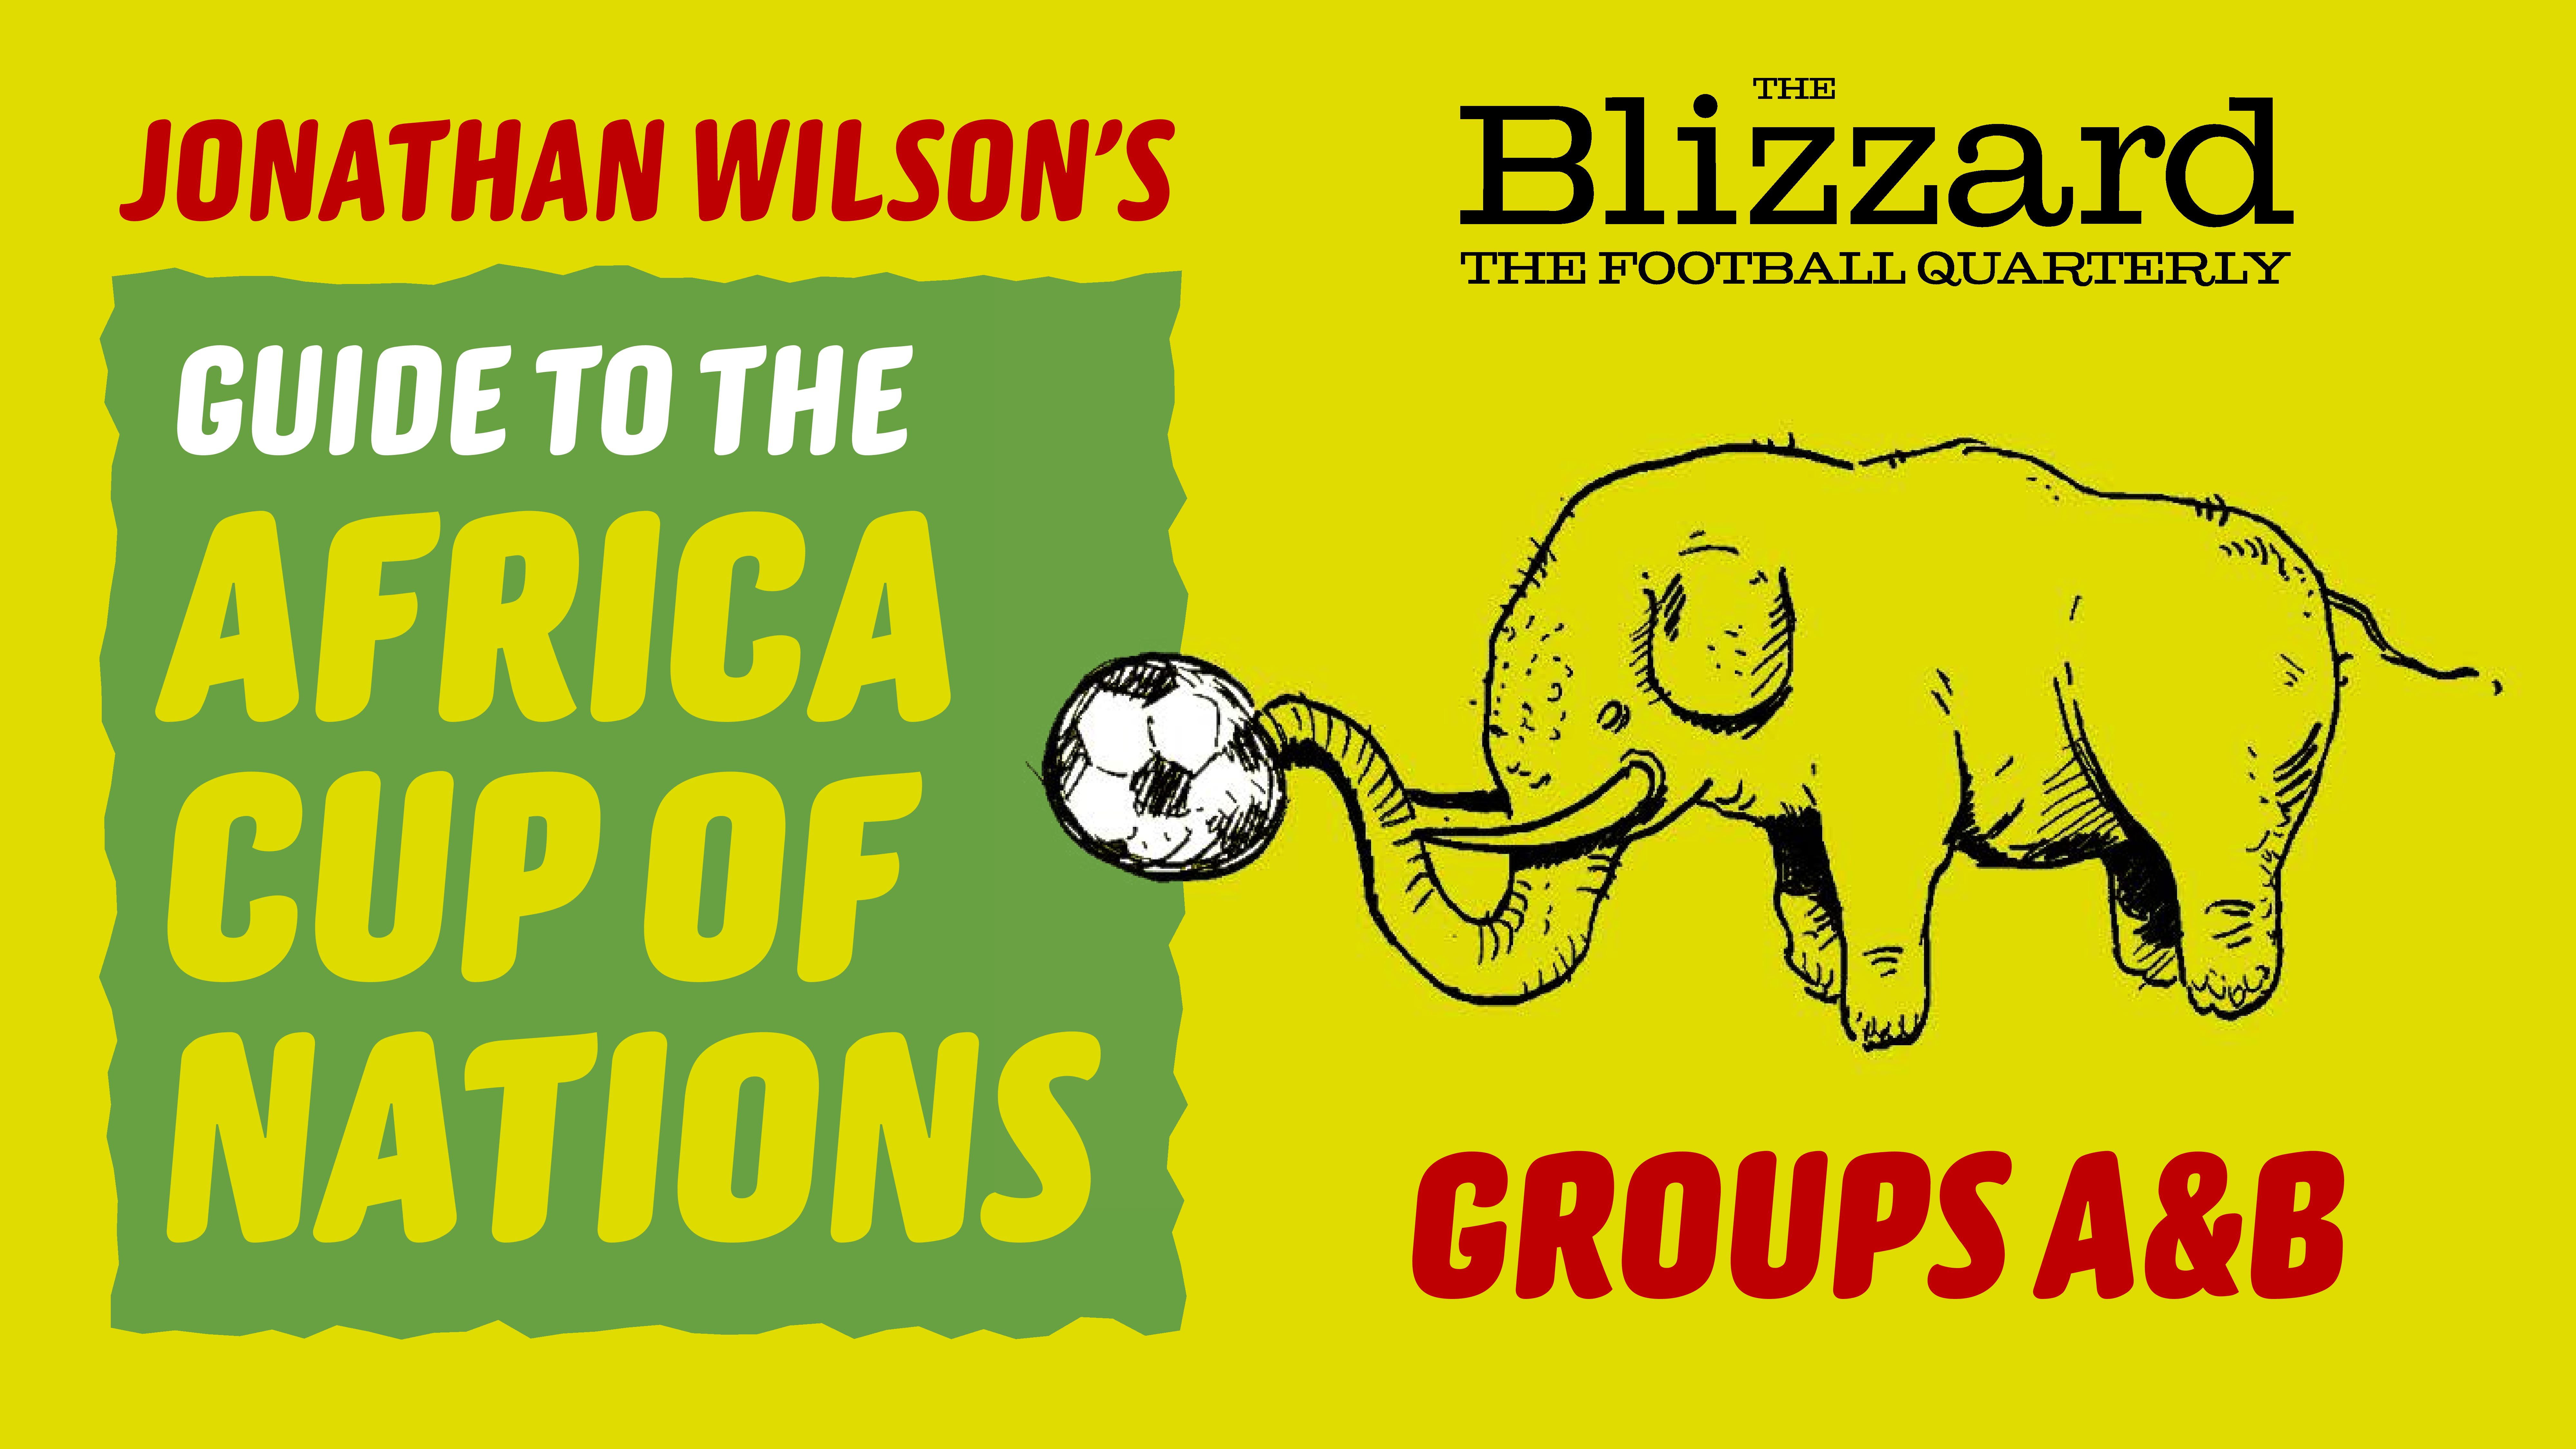 Groups A & B – Jonathan Wilson’s Guide to Afcon 2019